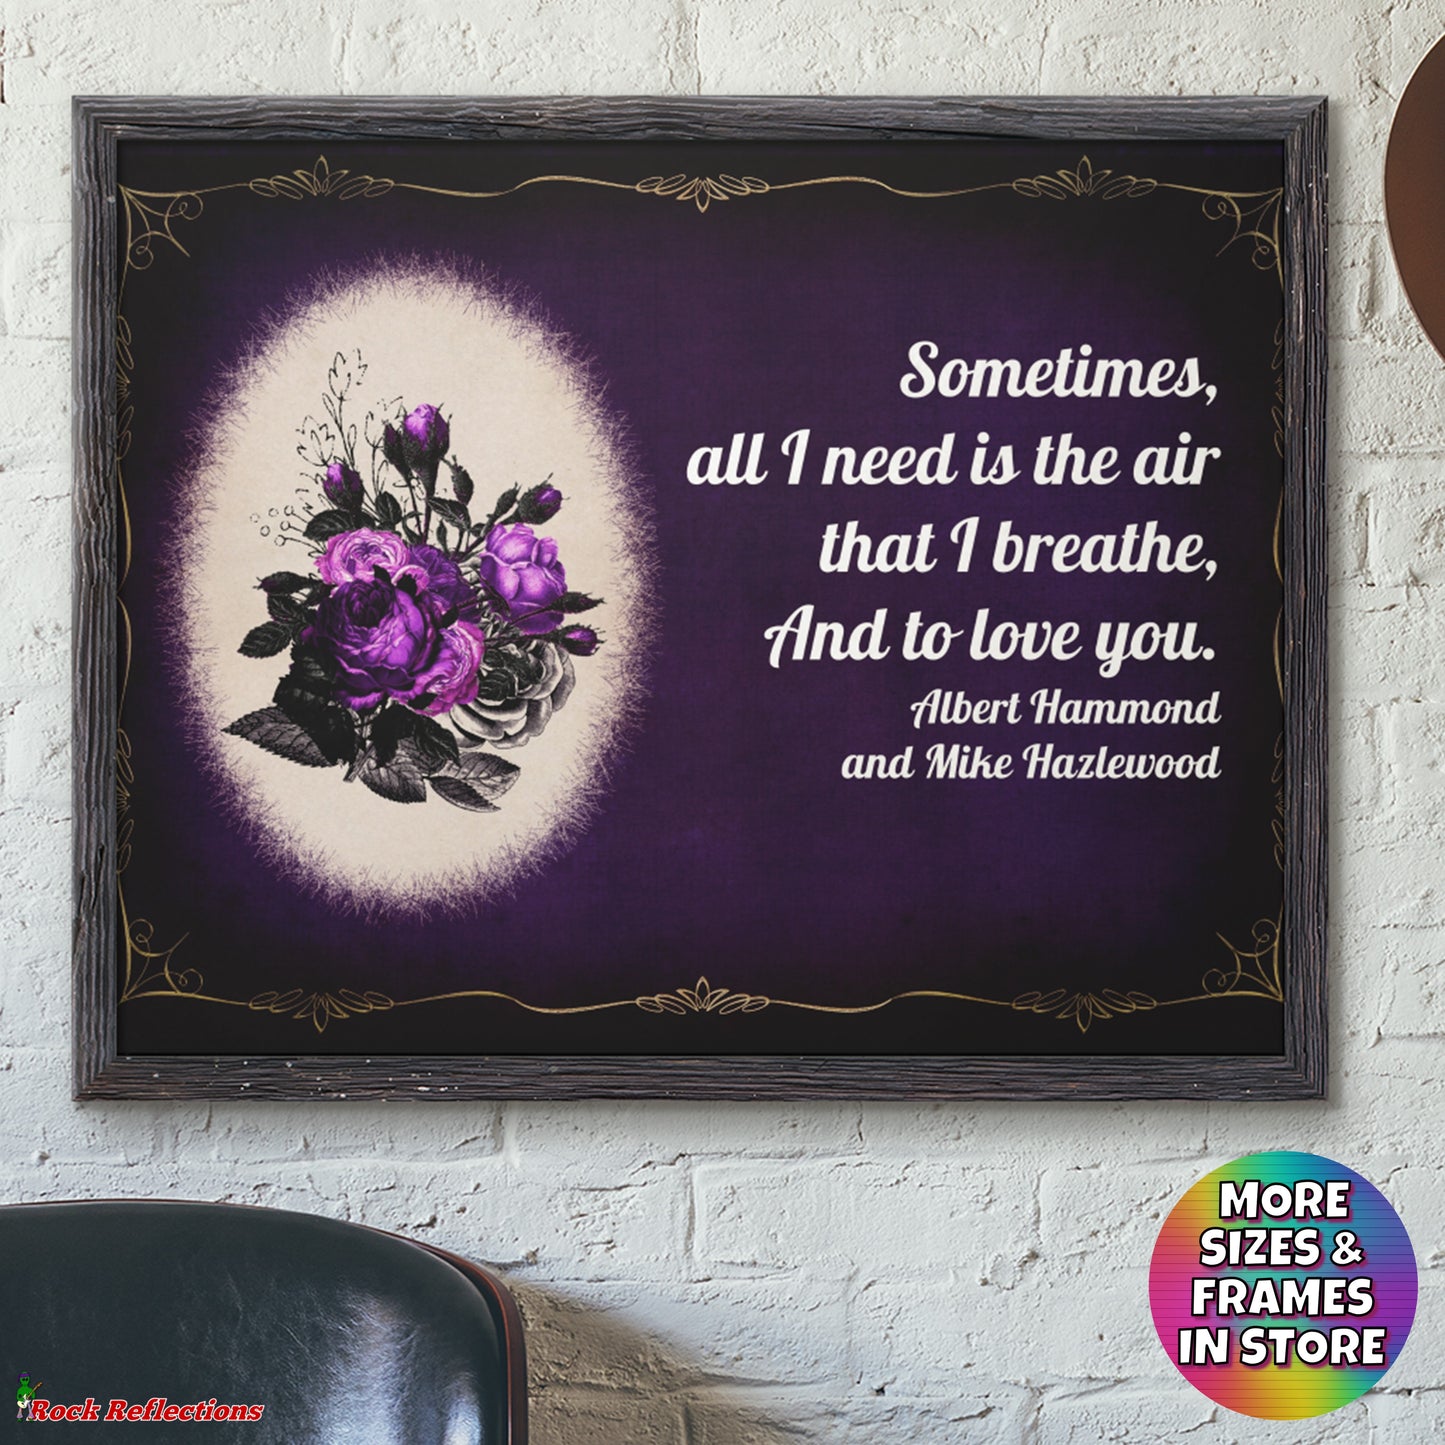 The Air That I Breathe - Music Quote Framed Print Gelato